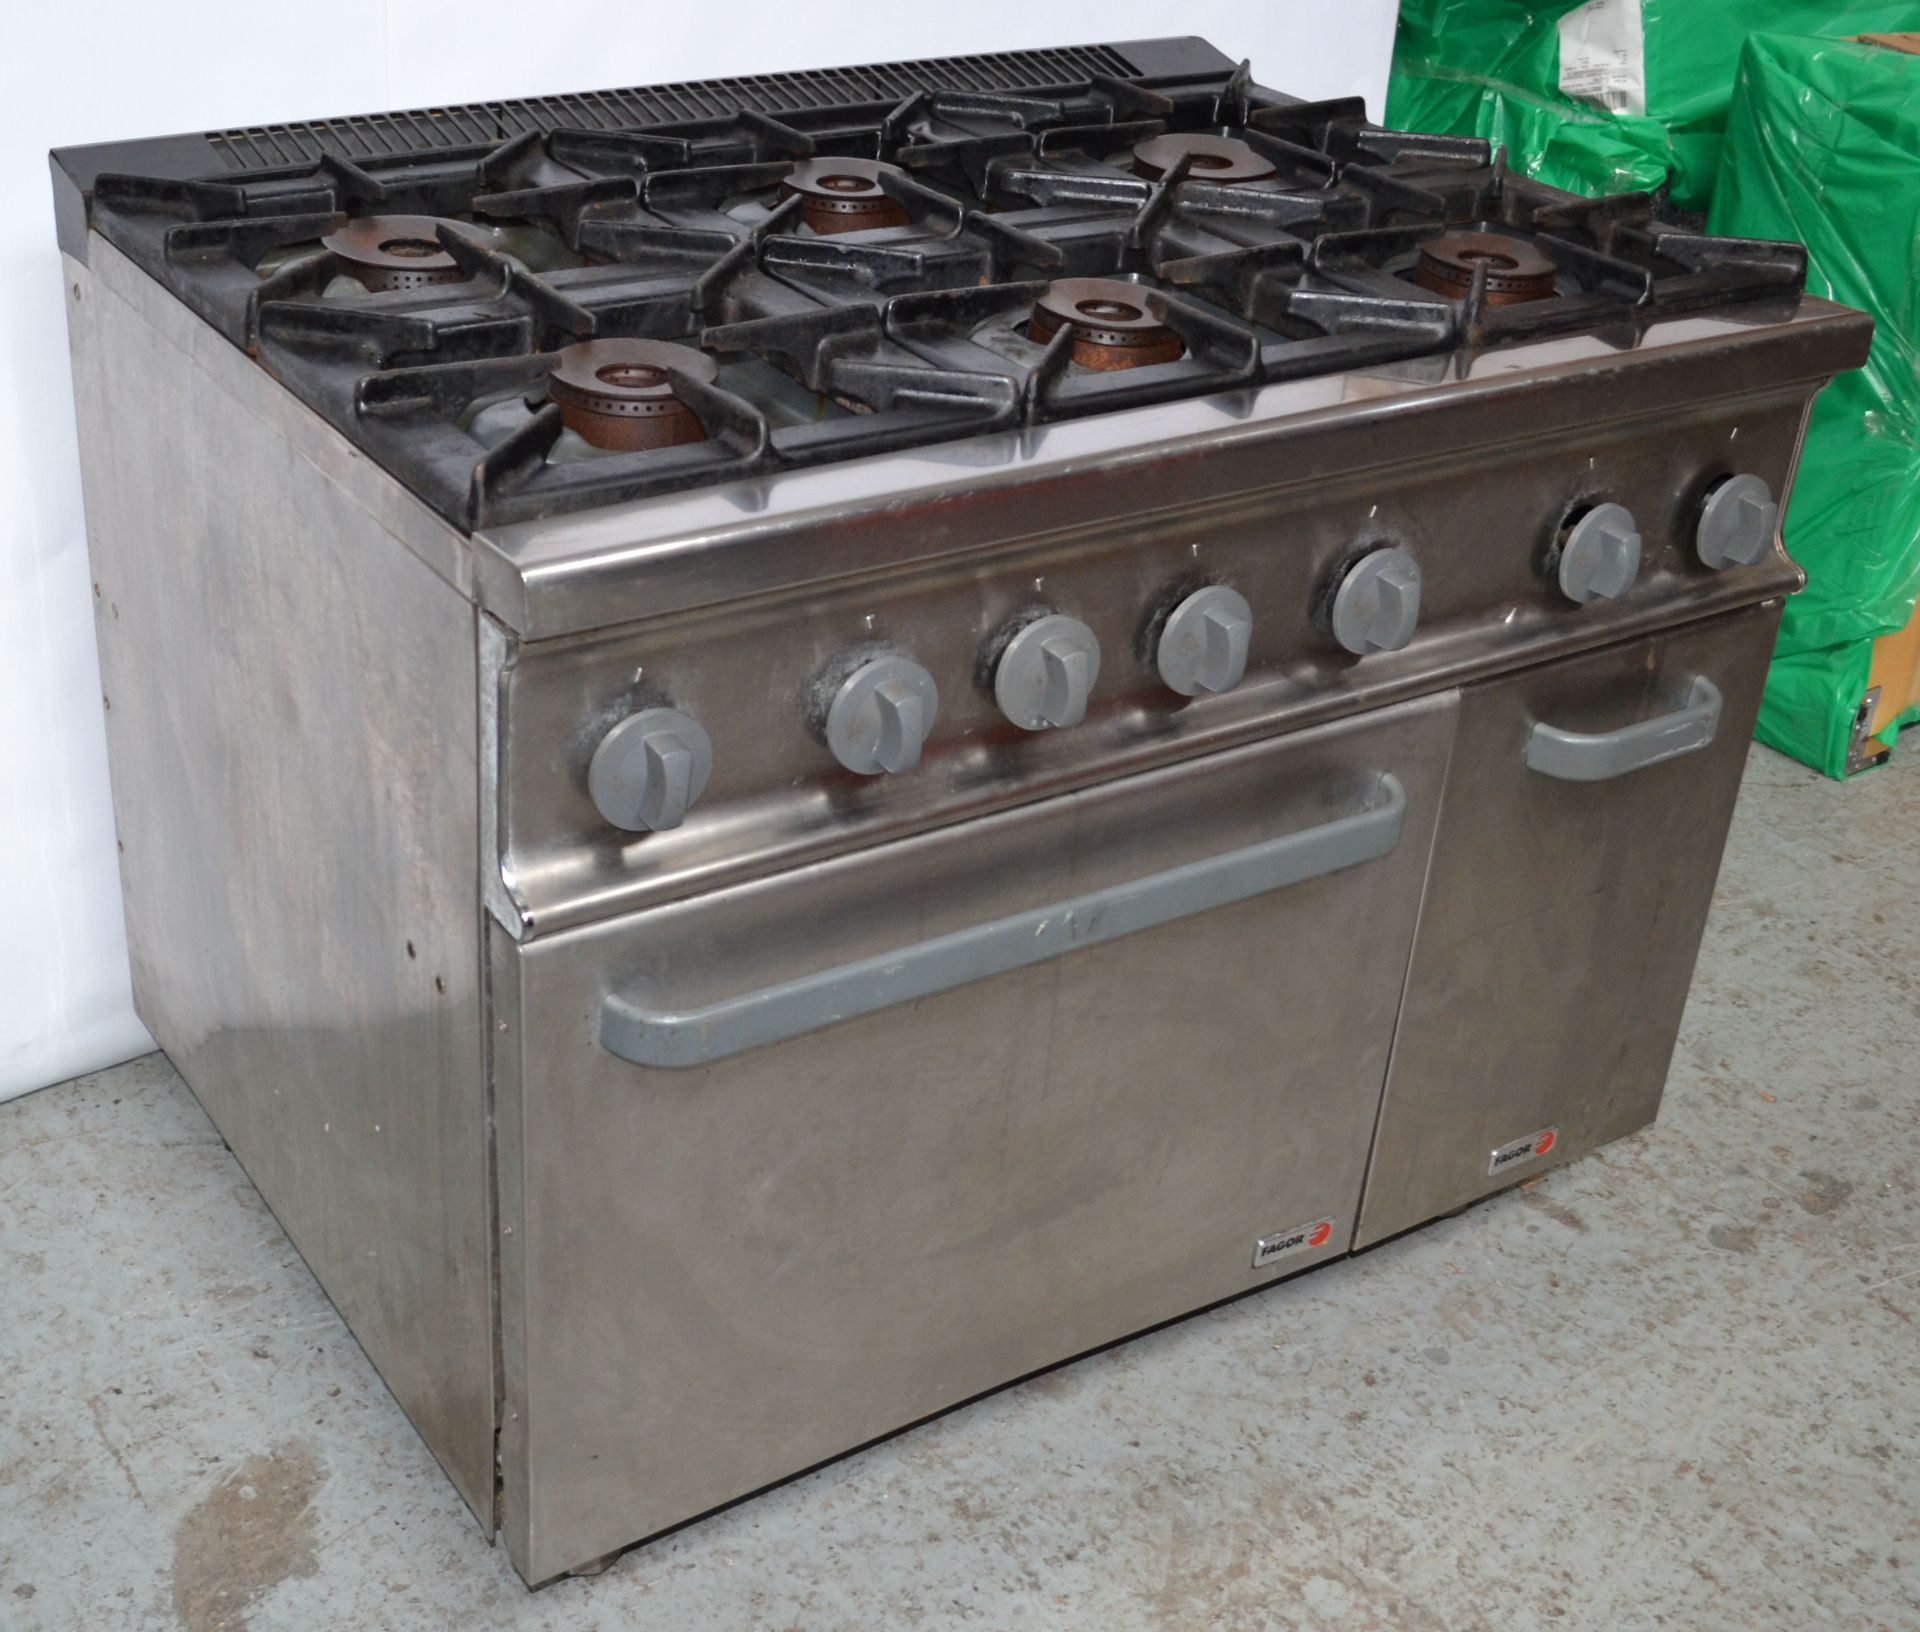 1 x Fagor Six Burner Gas Oven Range (CG-761 BR SM) - Ref NCE011 - CL178 - Location: Altrincham - Image 2 of 15